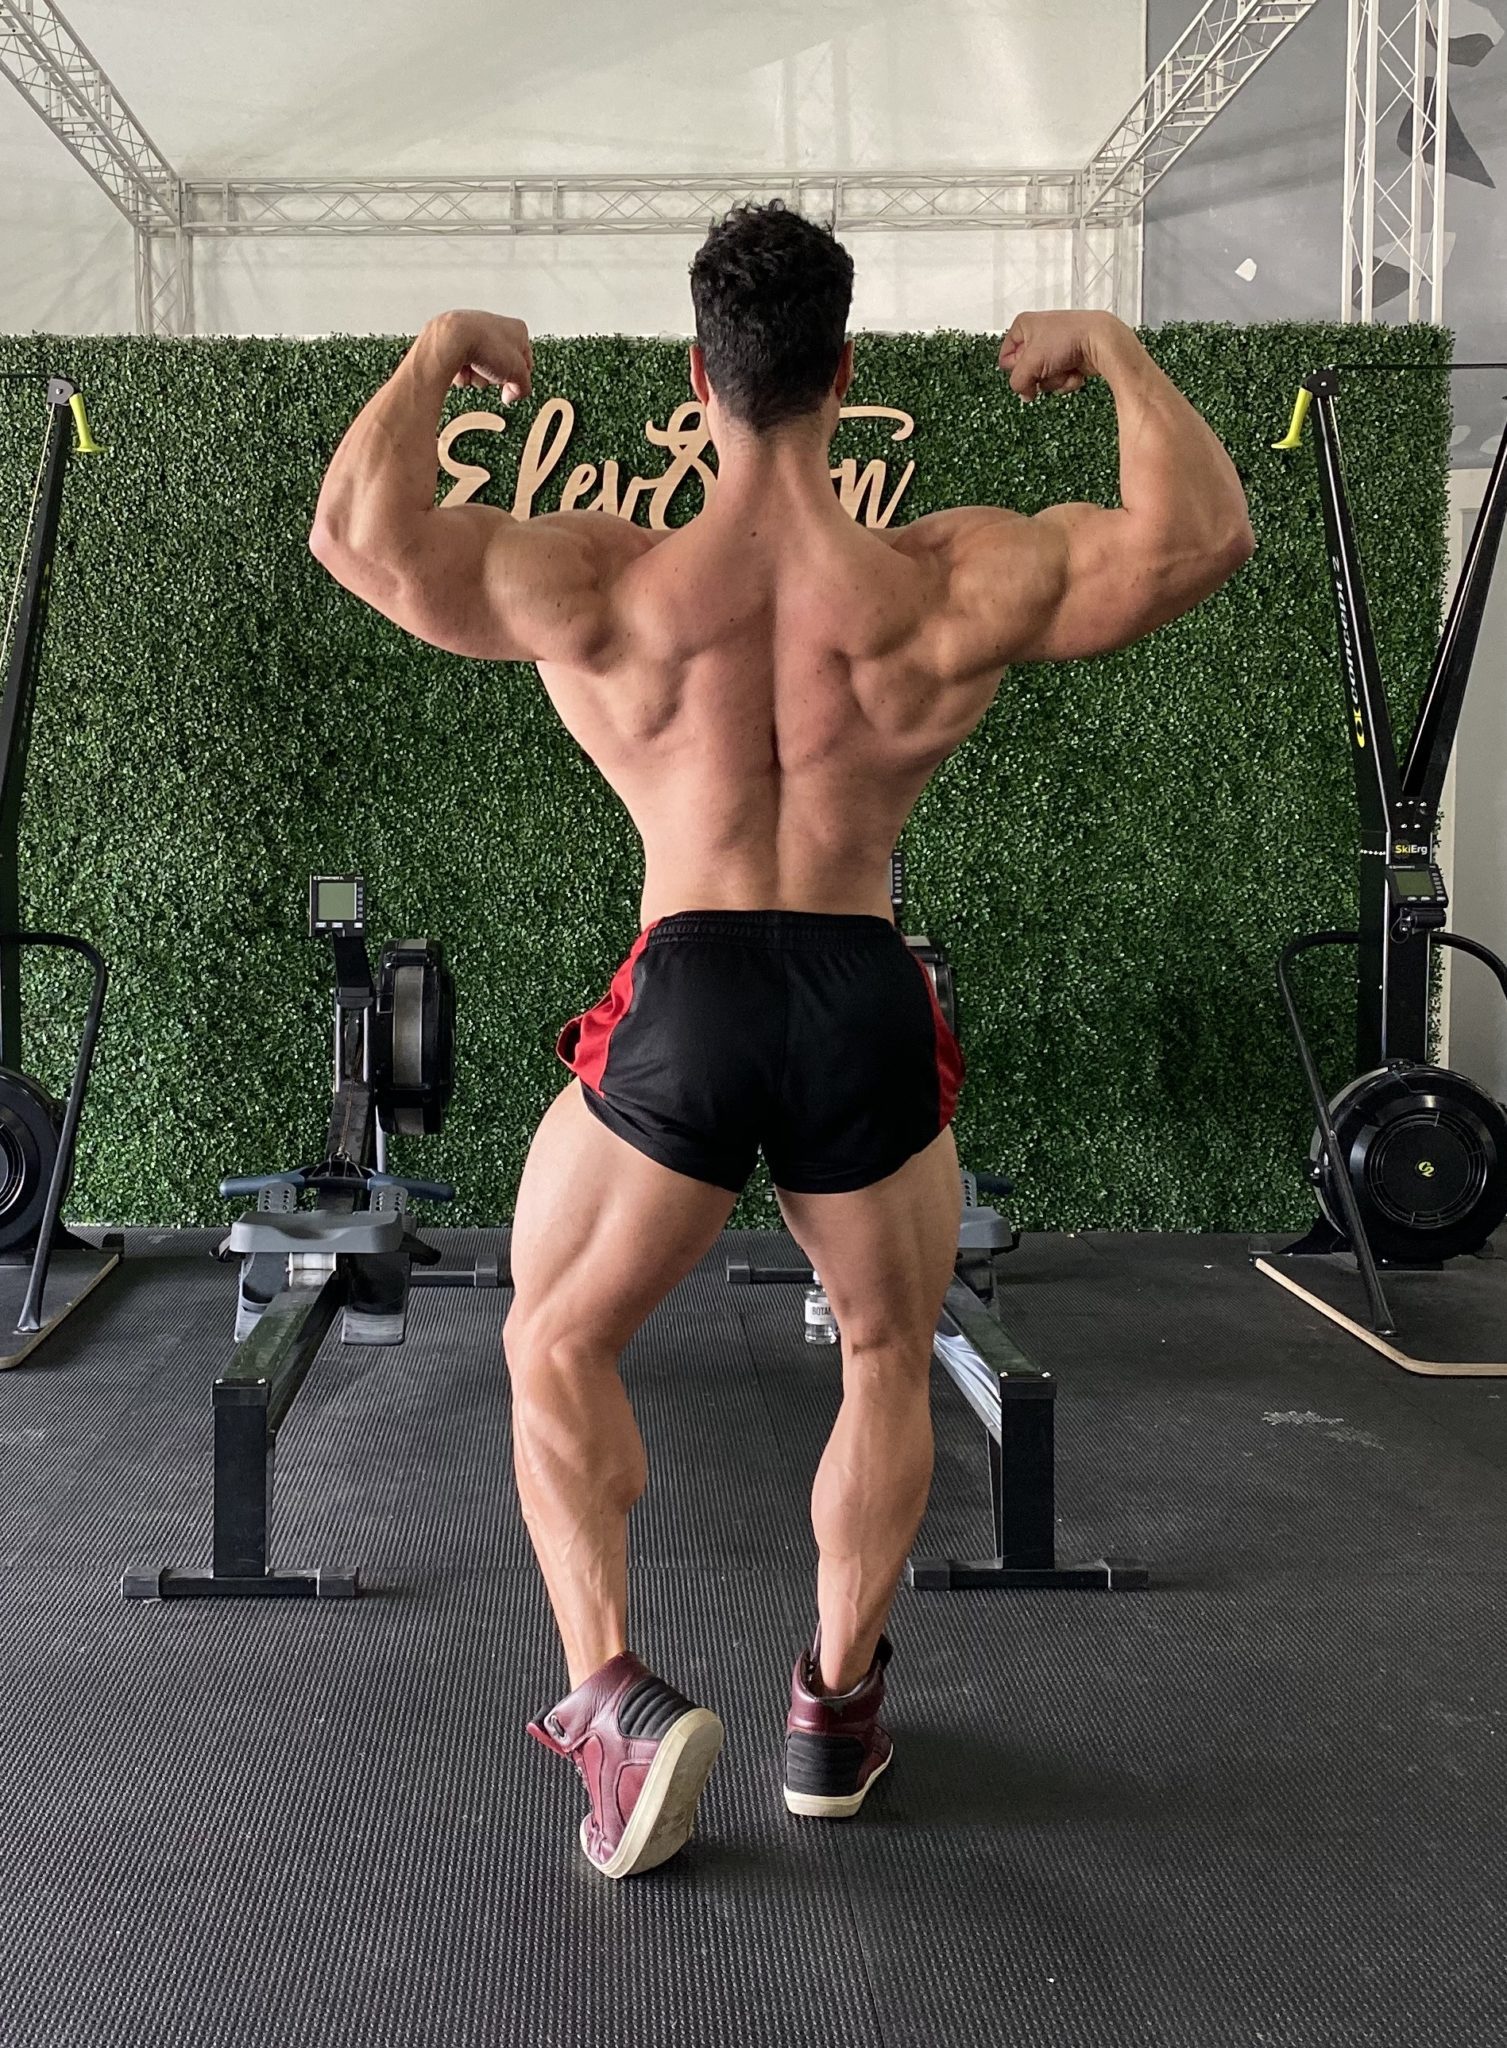 Bodybuilding poses : Rules and Posing classic physical